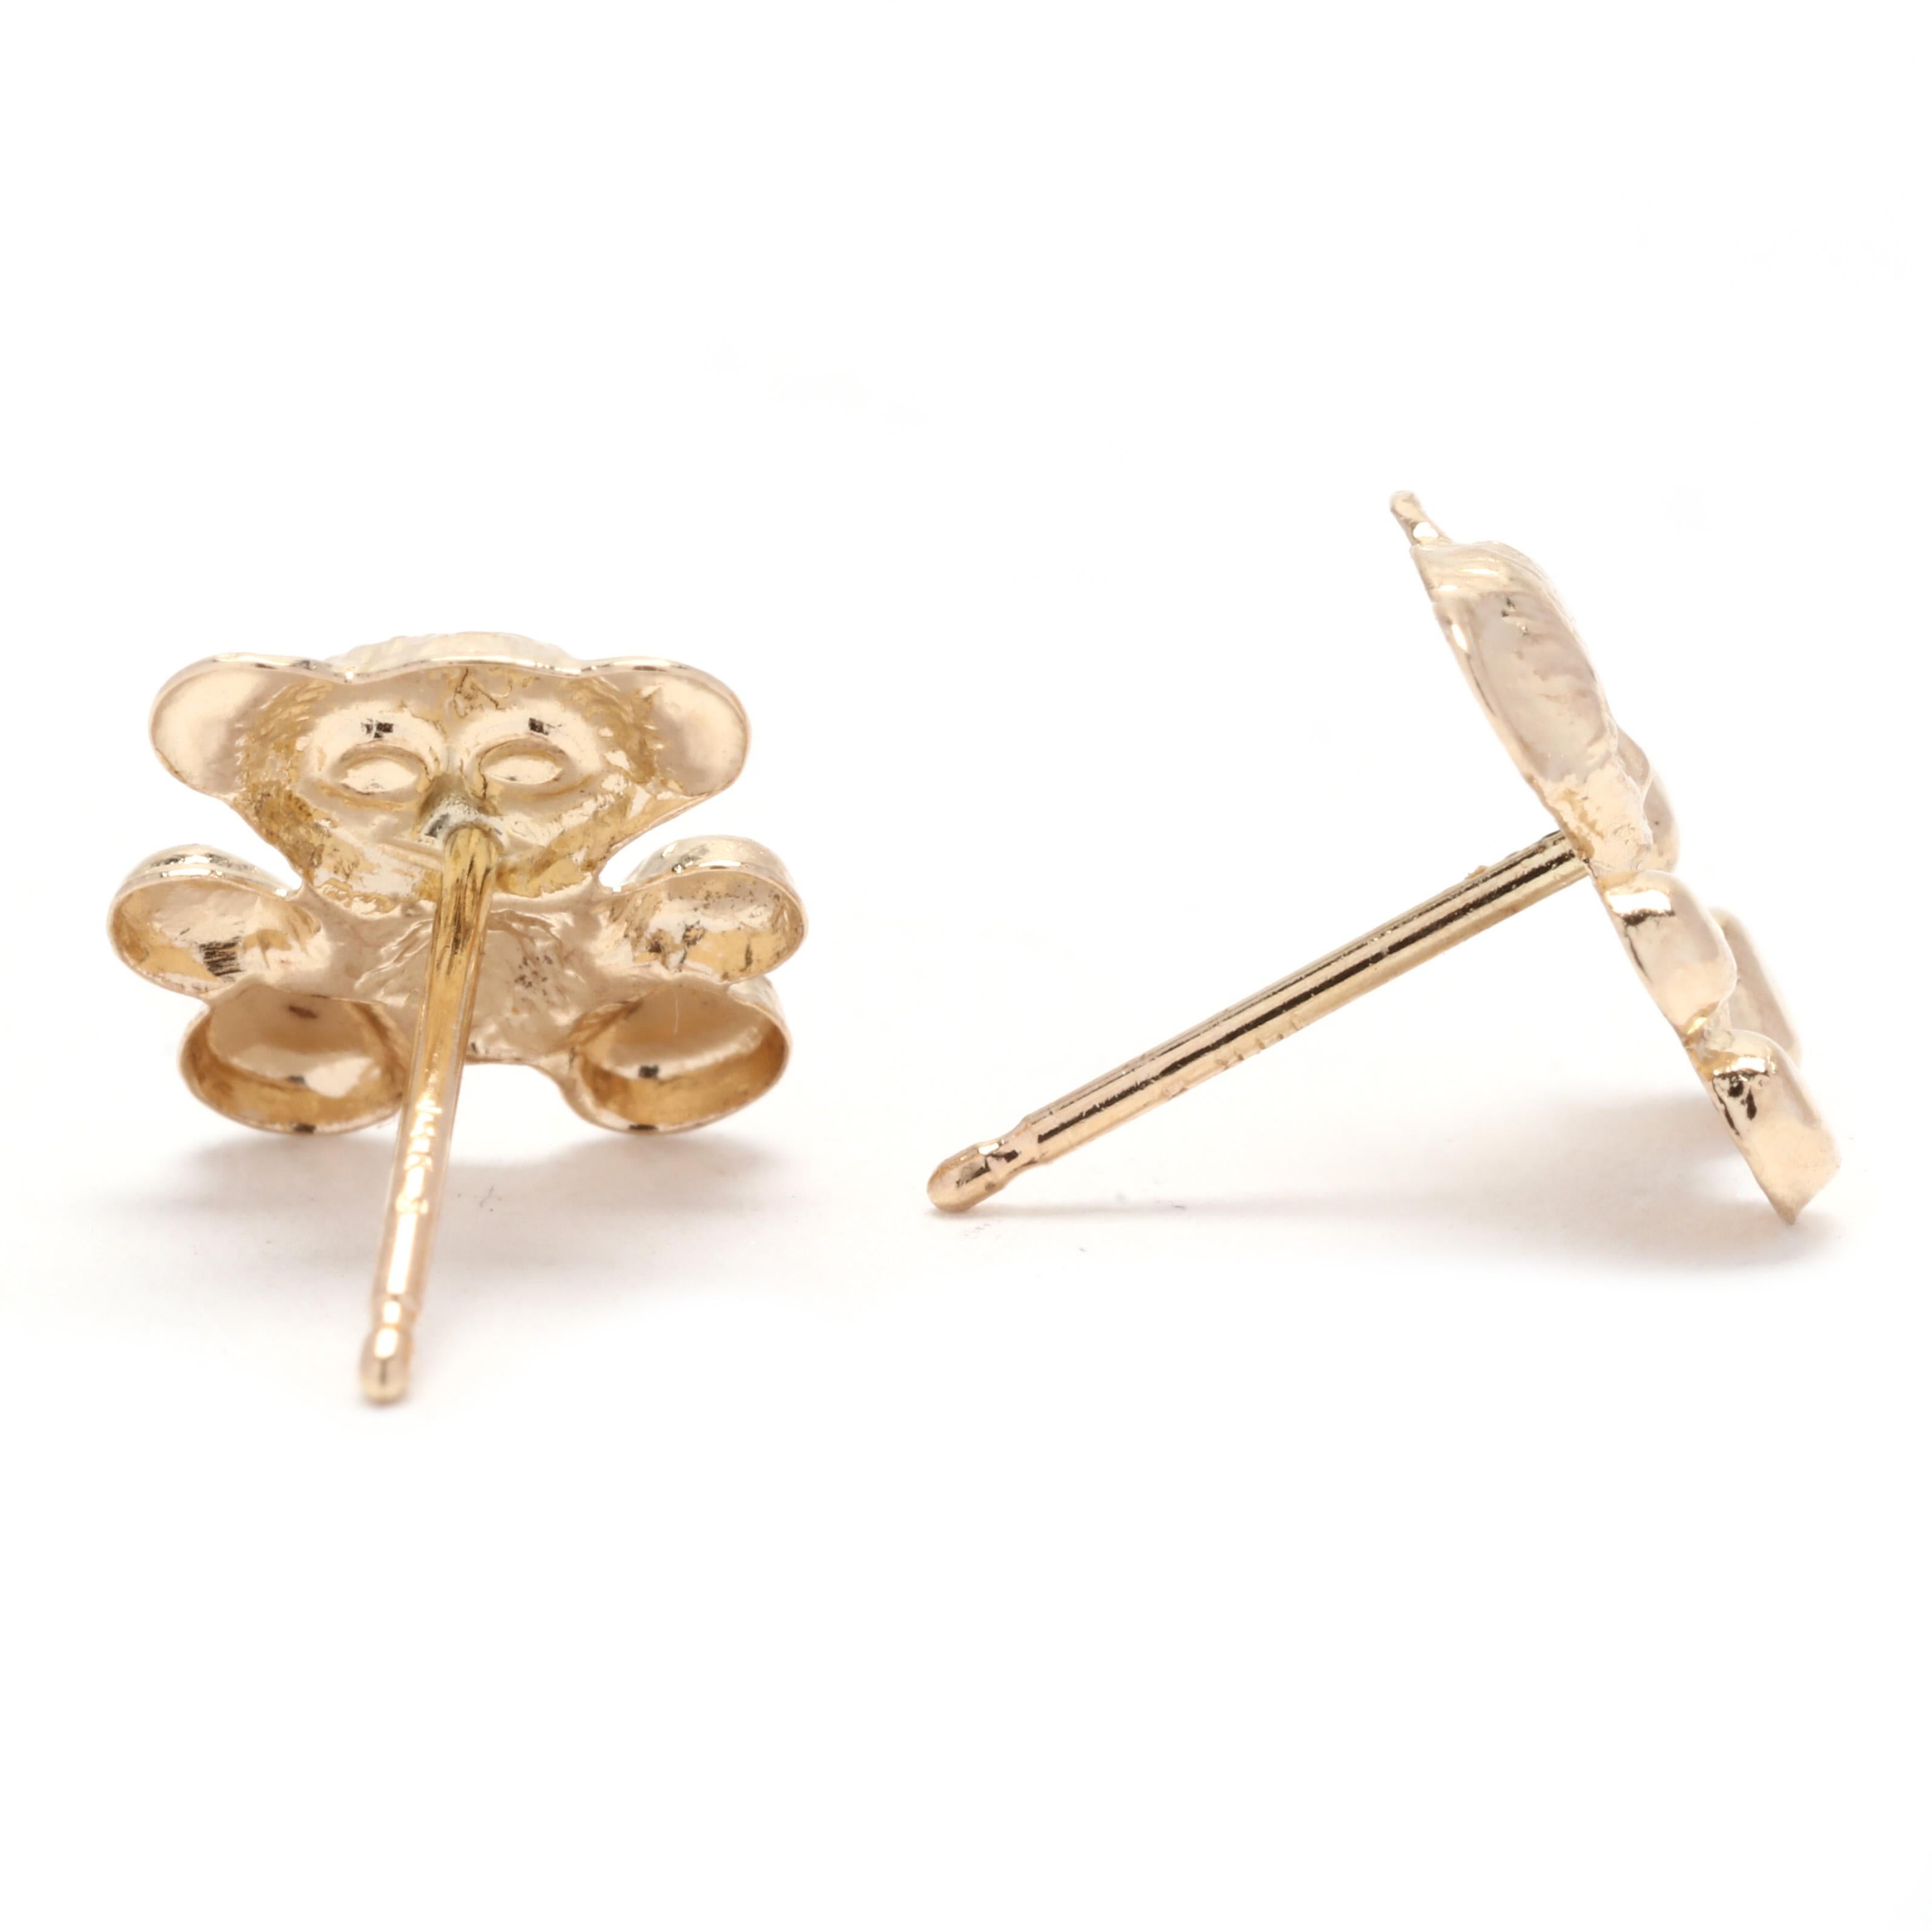 Add a touch of cuteness to your everyday look with these small teddy bear stud earrings. Made with 14K yellow gold, these earrings feature a charming teddy bear design that is sure to melt hearts. With a length of 5/16 inch, these stud earrings are